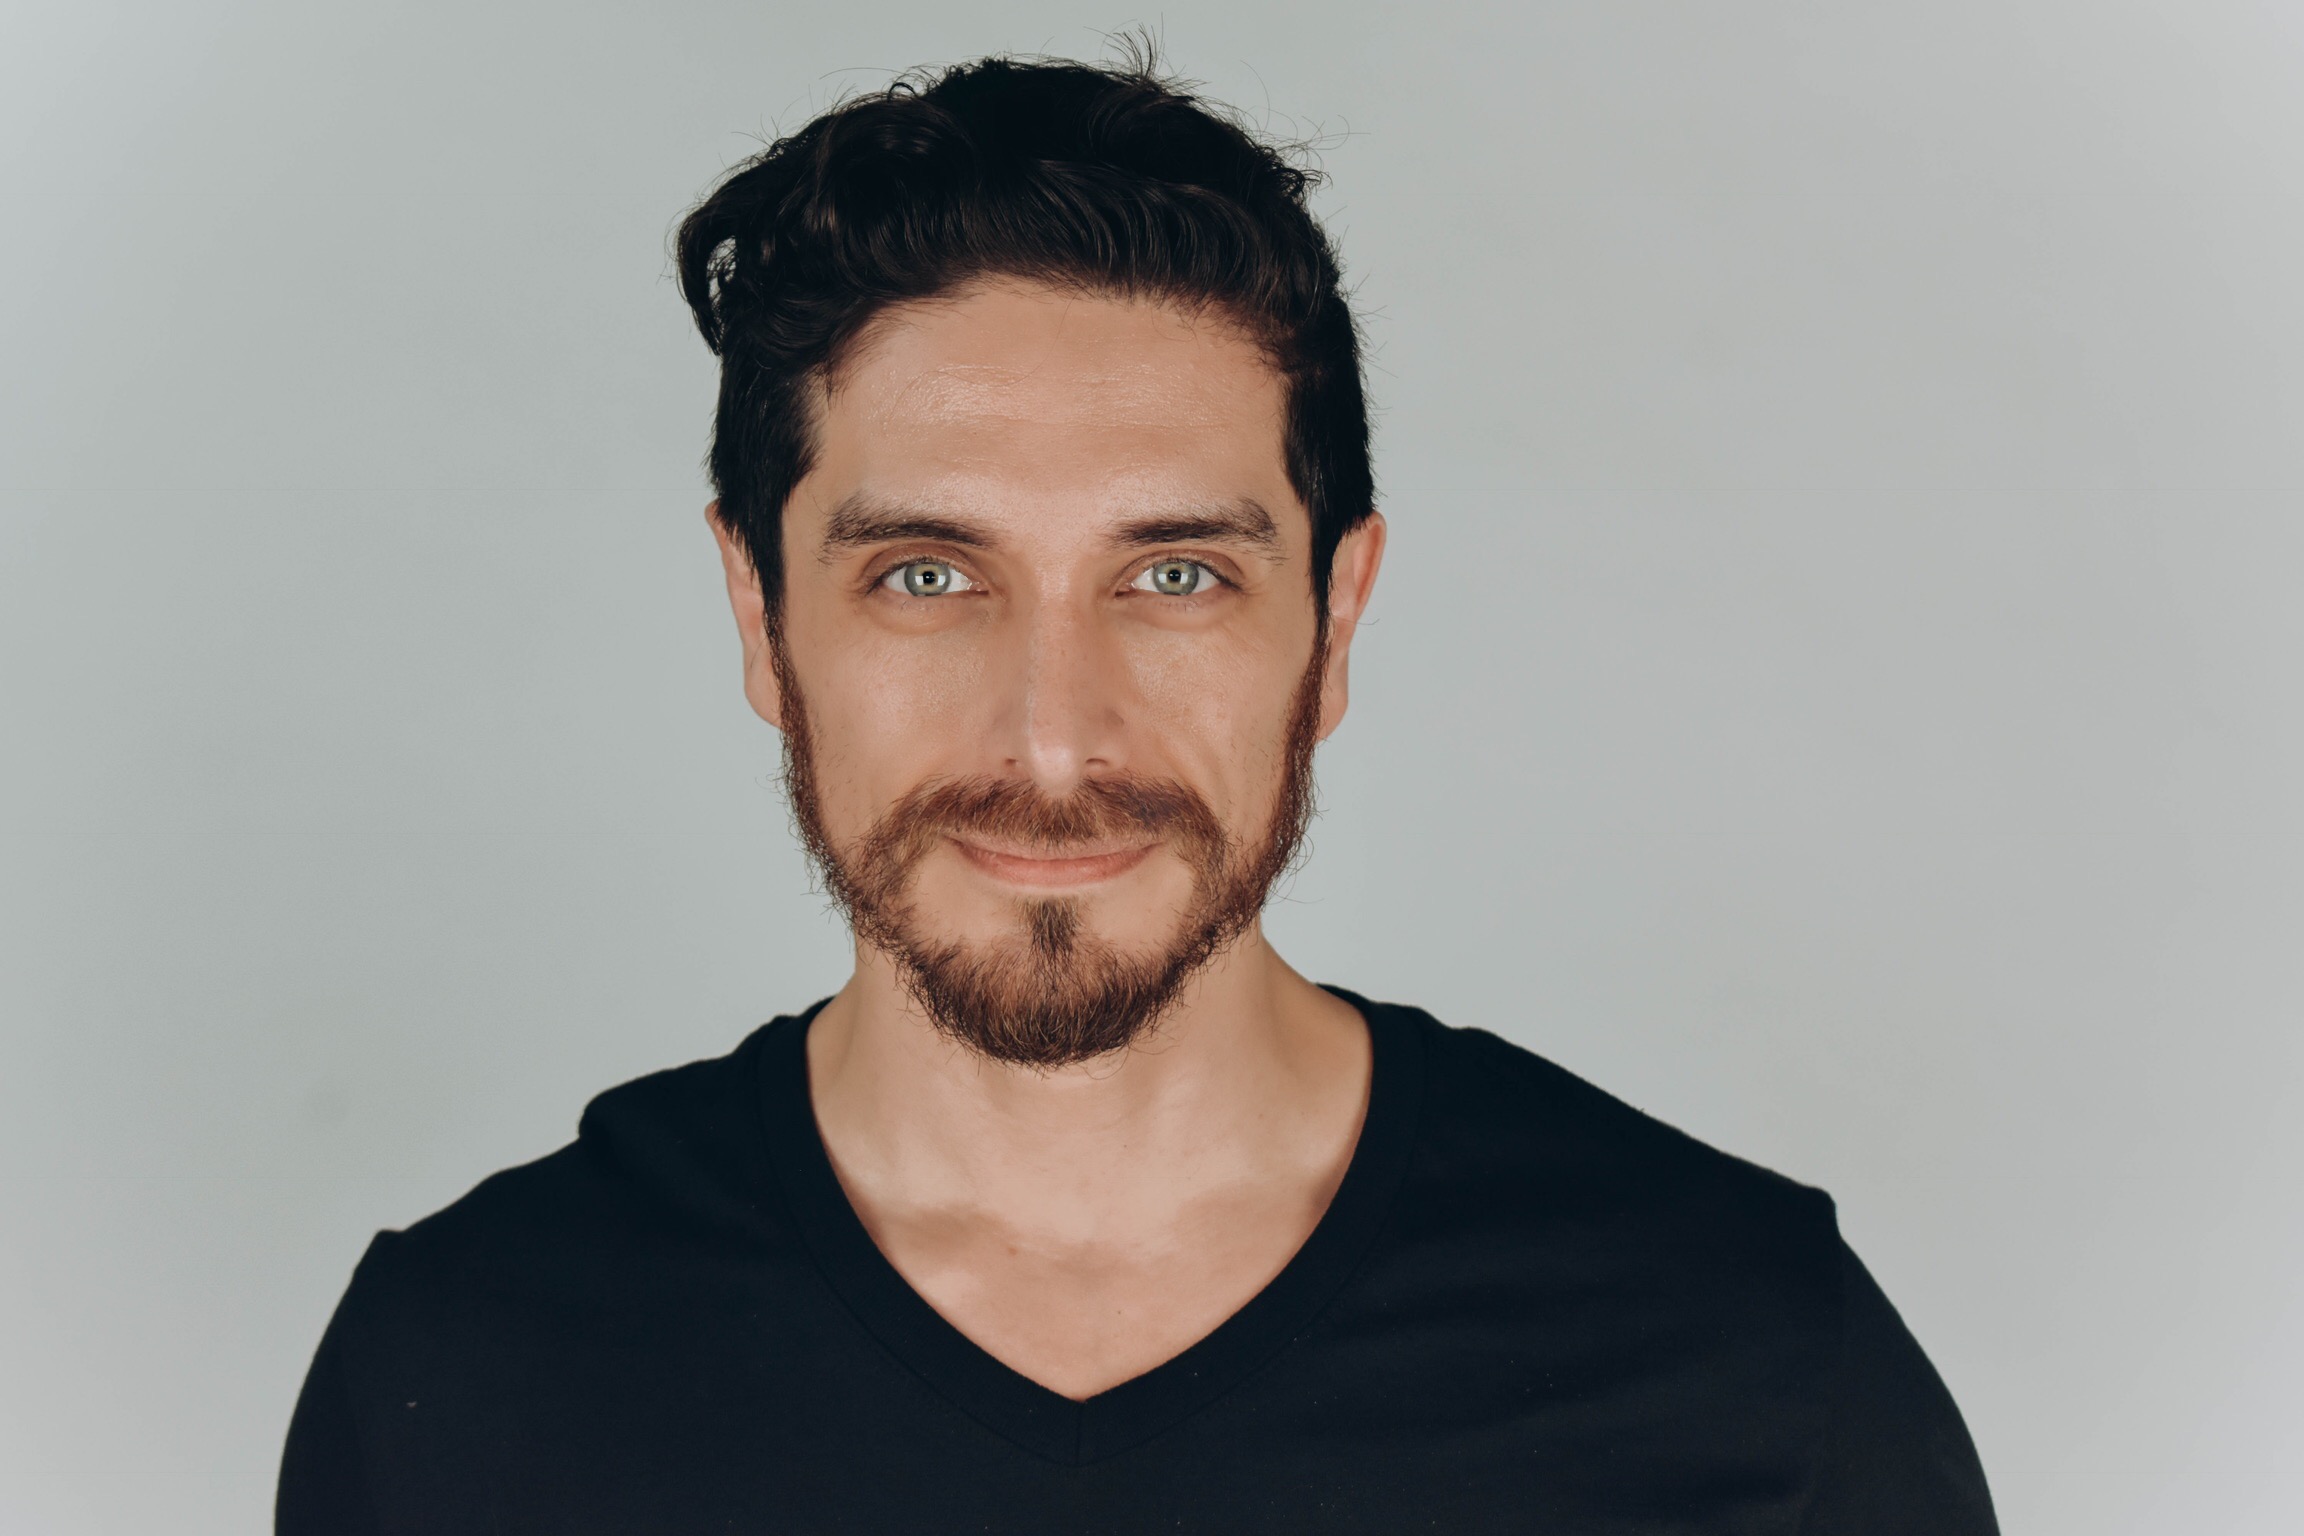 Video Interview with Voice Actor JOSH KEATON » The Art Club